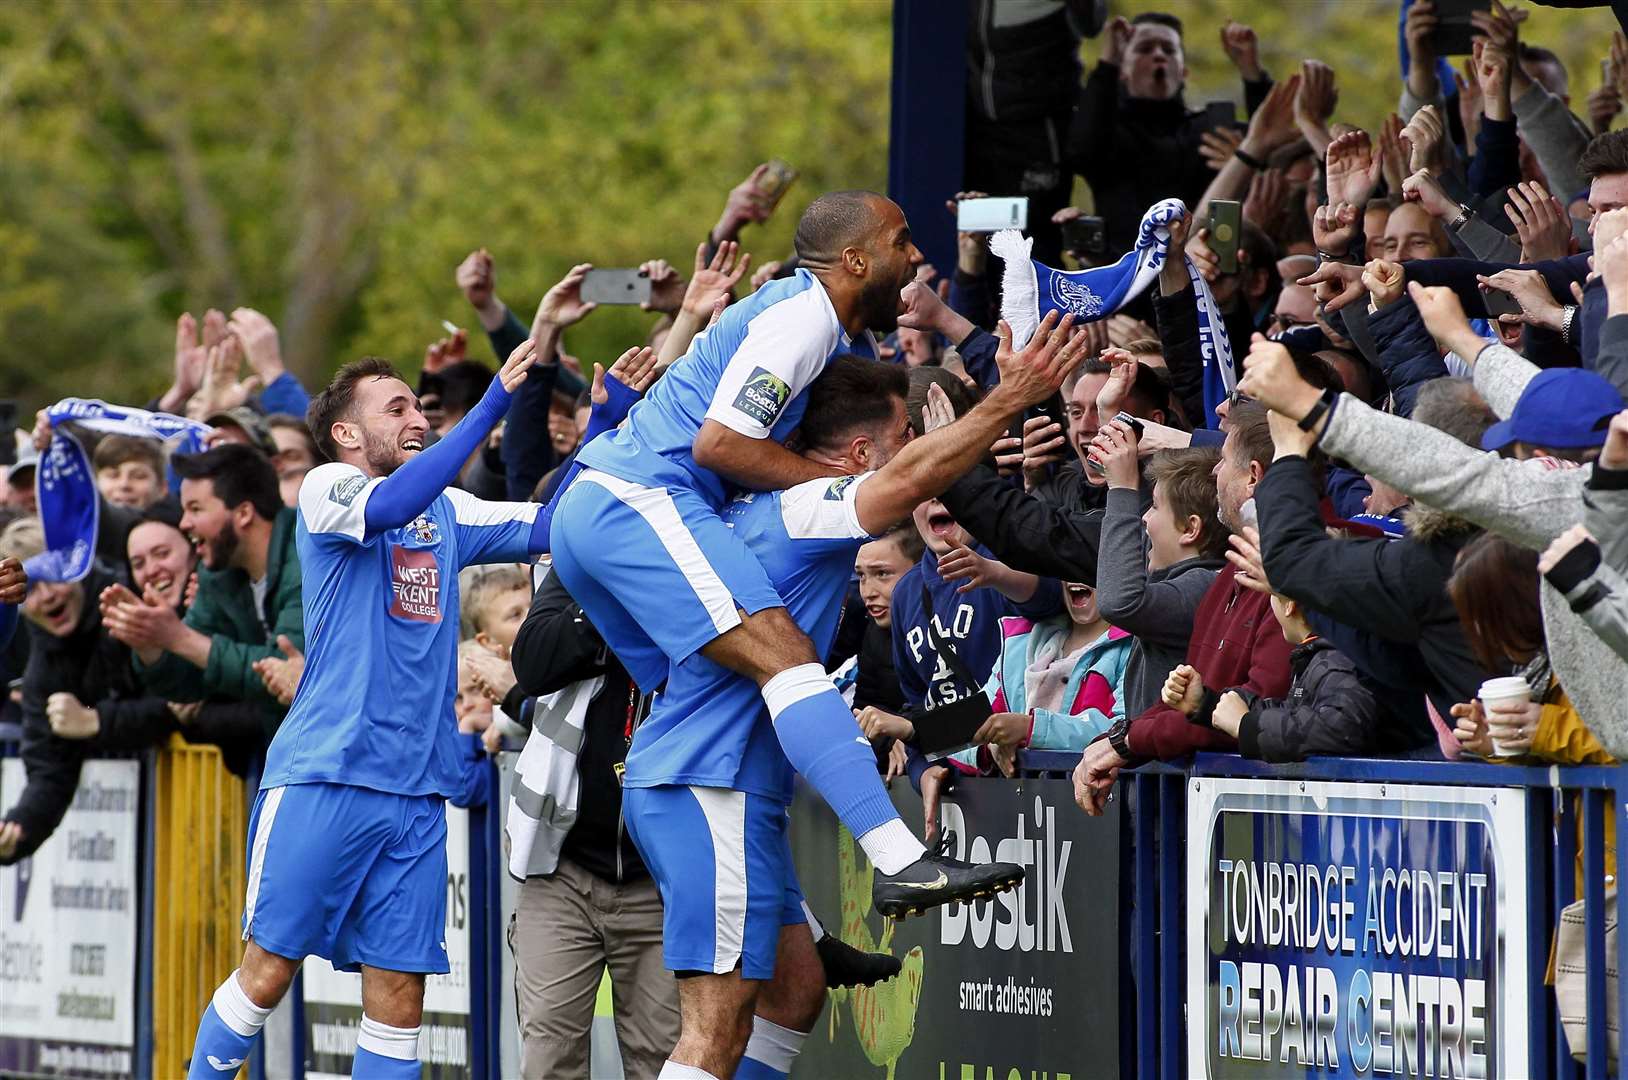 It's party time as the Tonbridge players celebrate with their supporters Picture: Sean Aidan